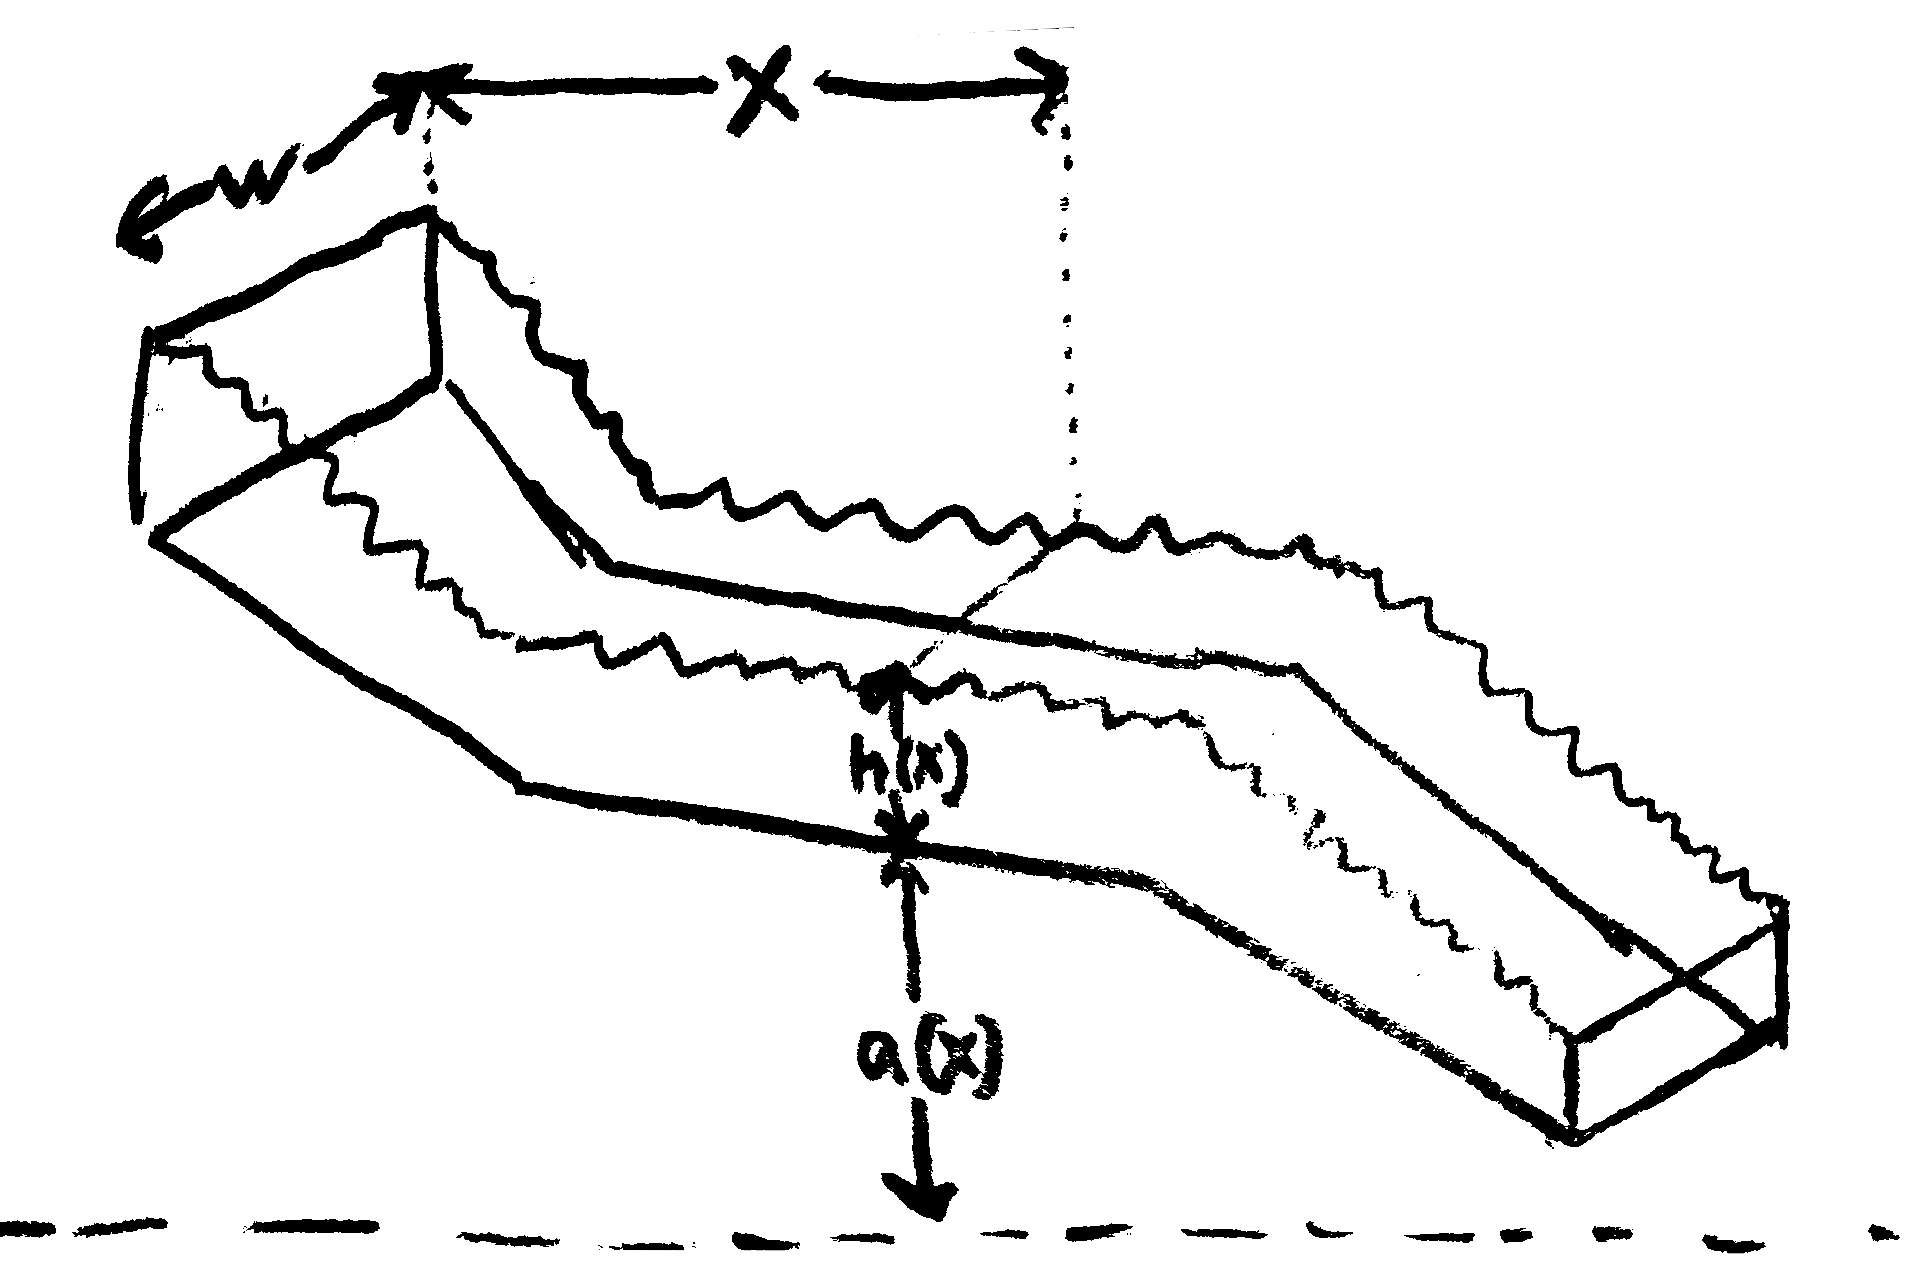 diagram of a riverbed of constant width using the above symbols